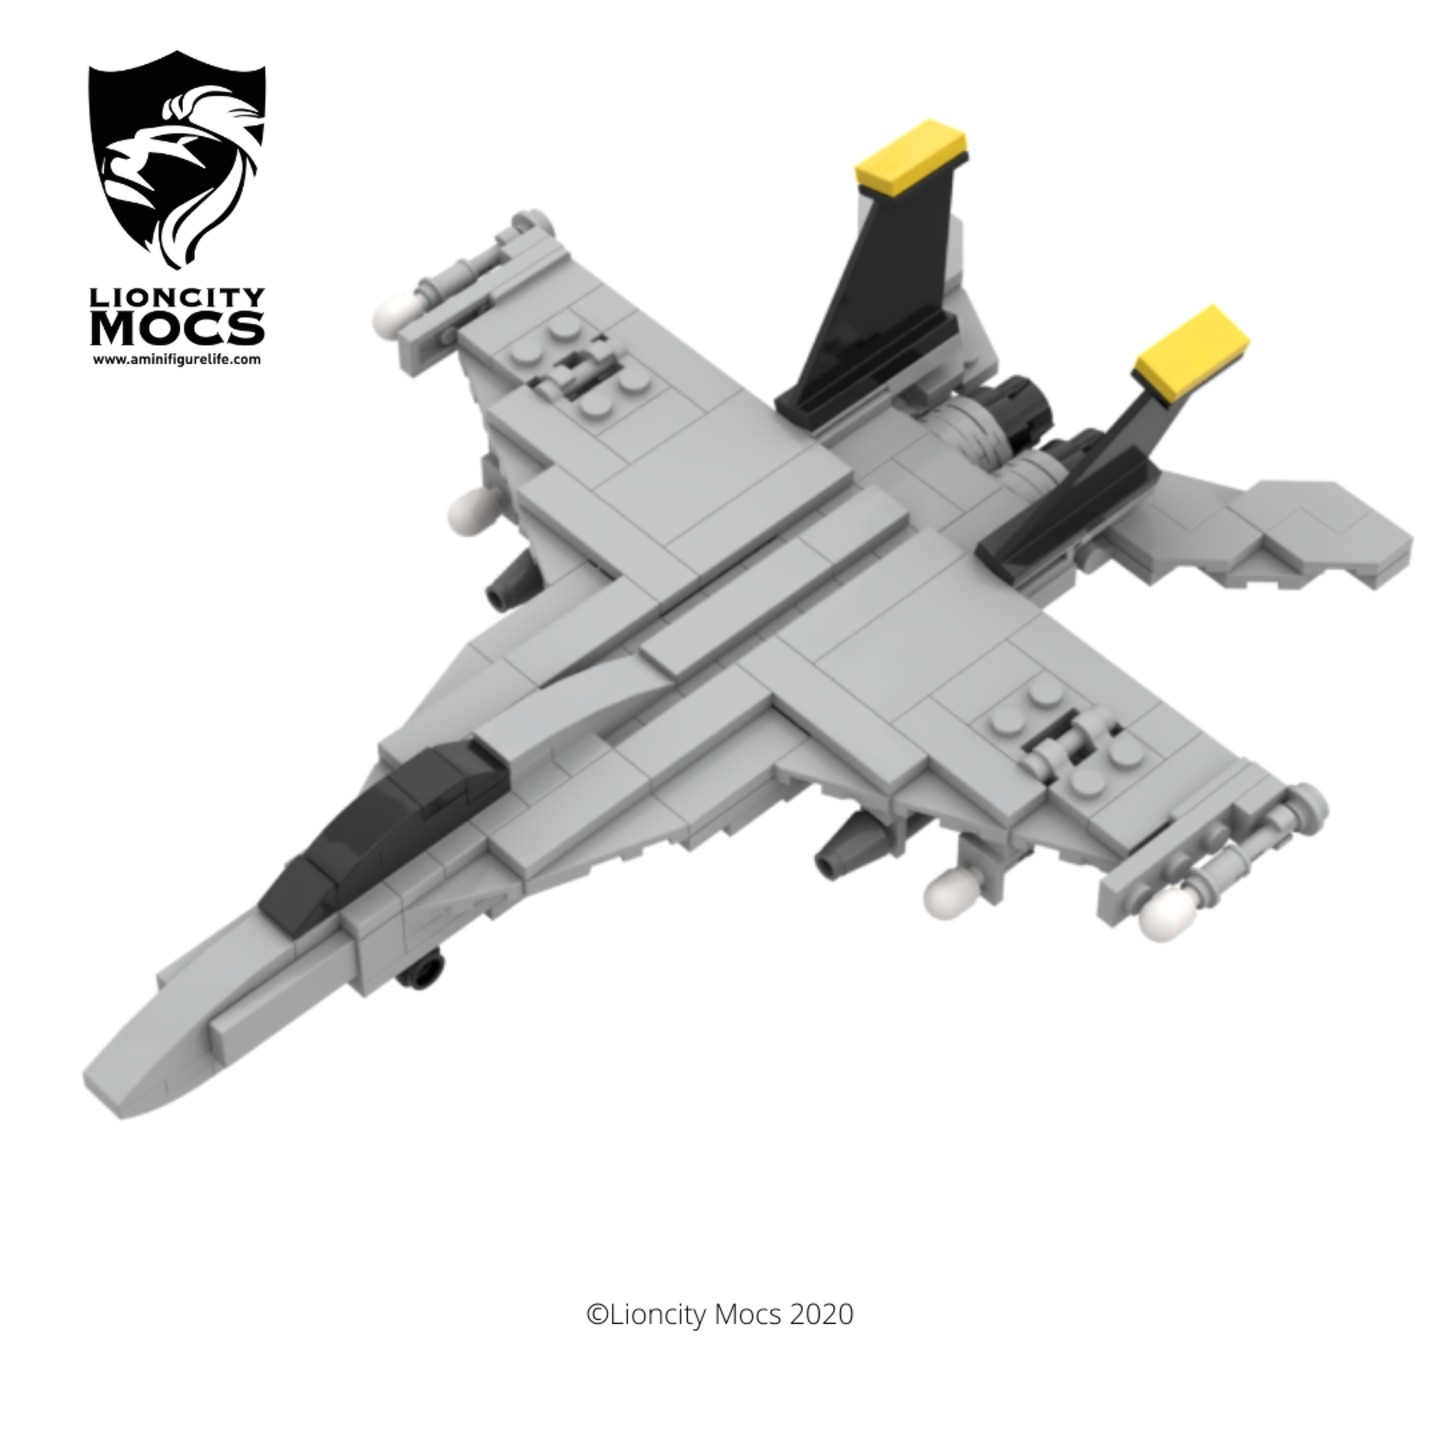  [PDF Instructions Only] F-18 Hornet Fighter Aircraft Mini